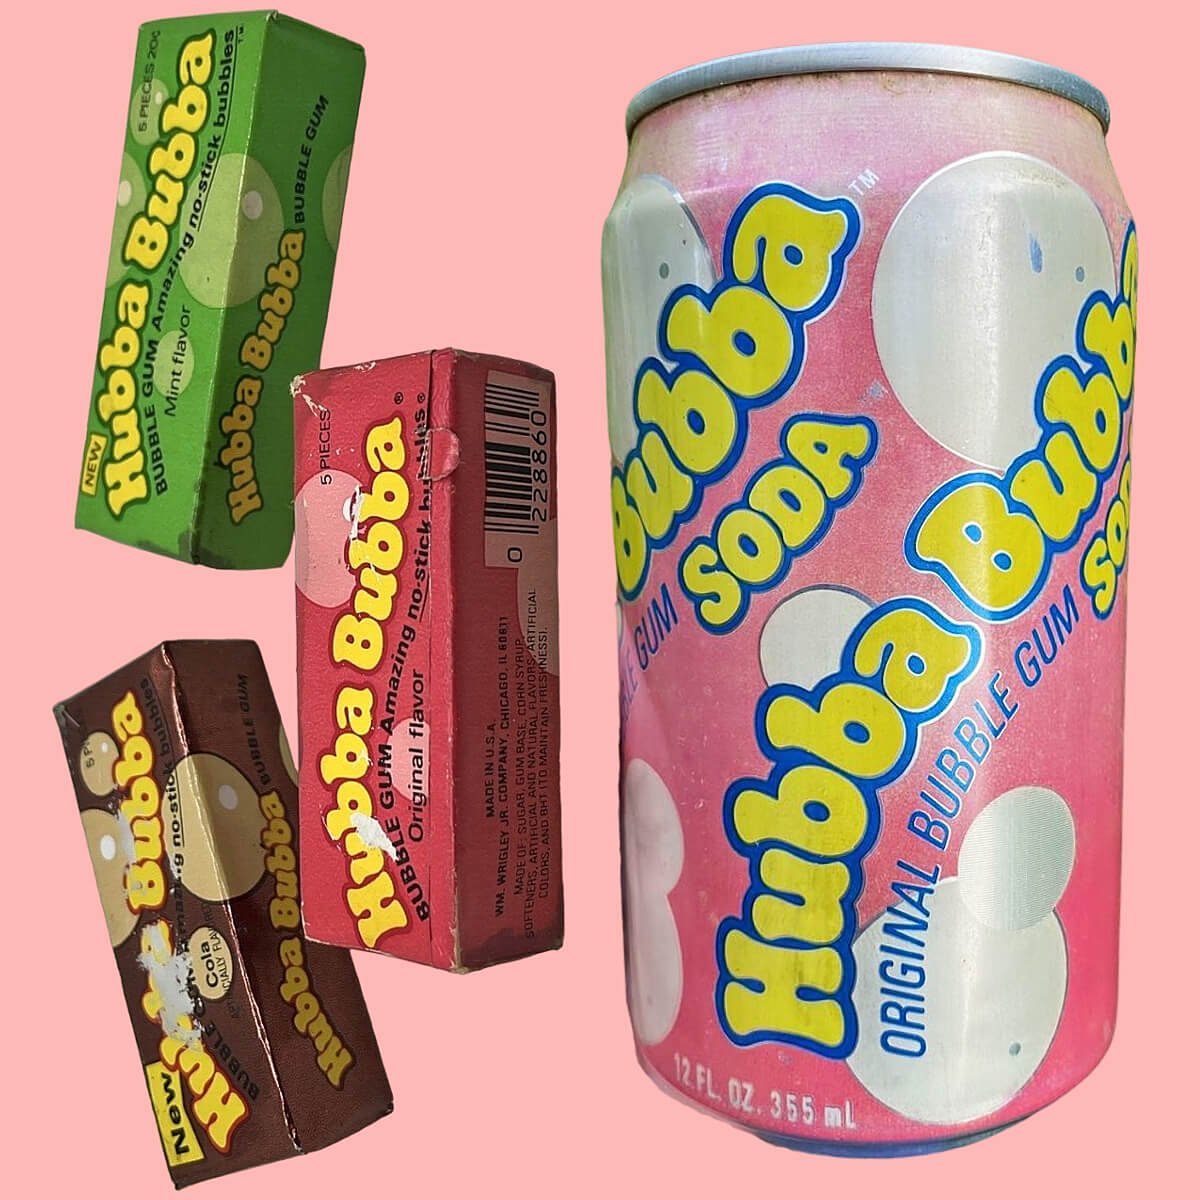 Three packs of Hubba Bubba bubblegum and soda can from the 1980s